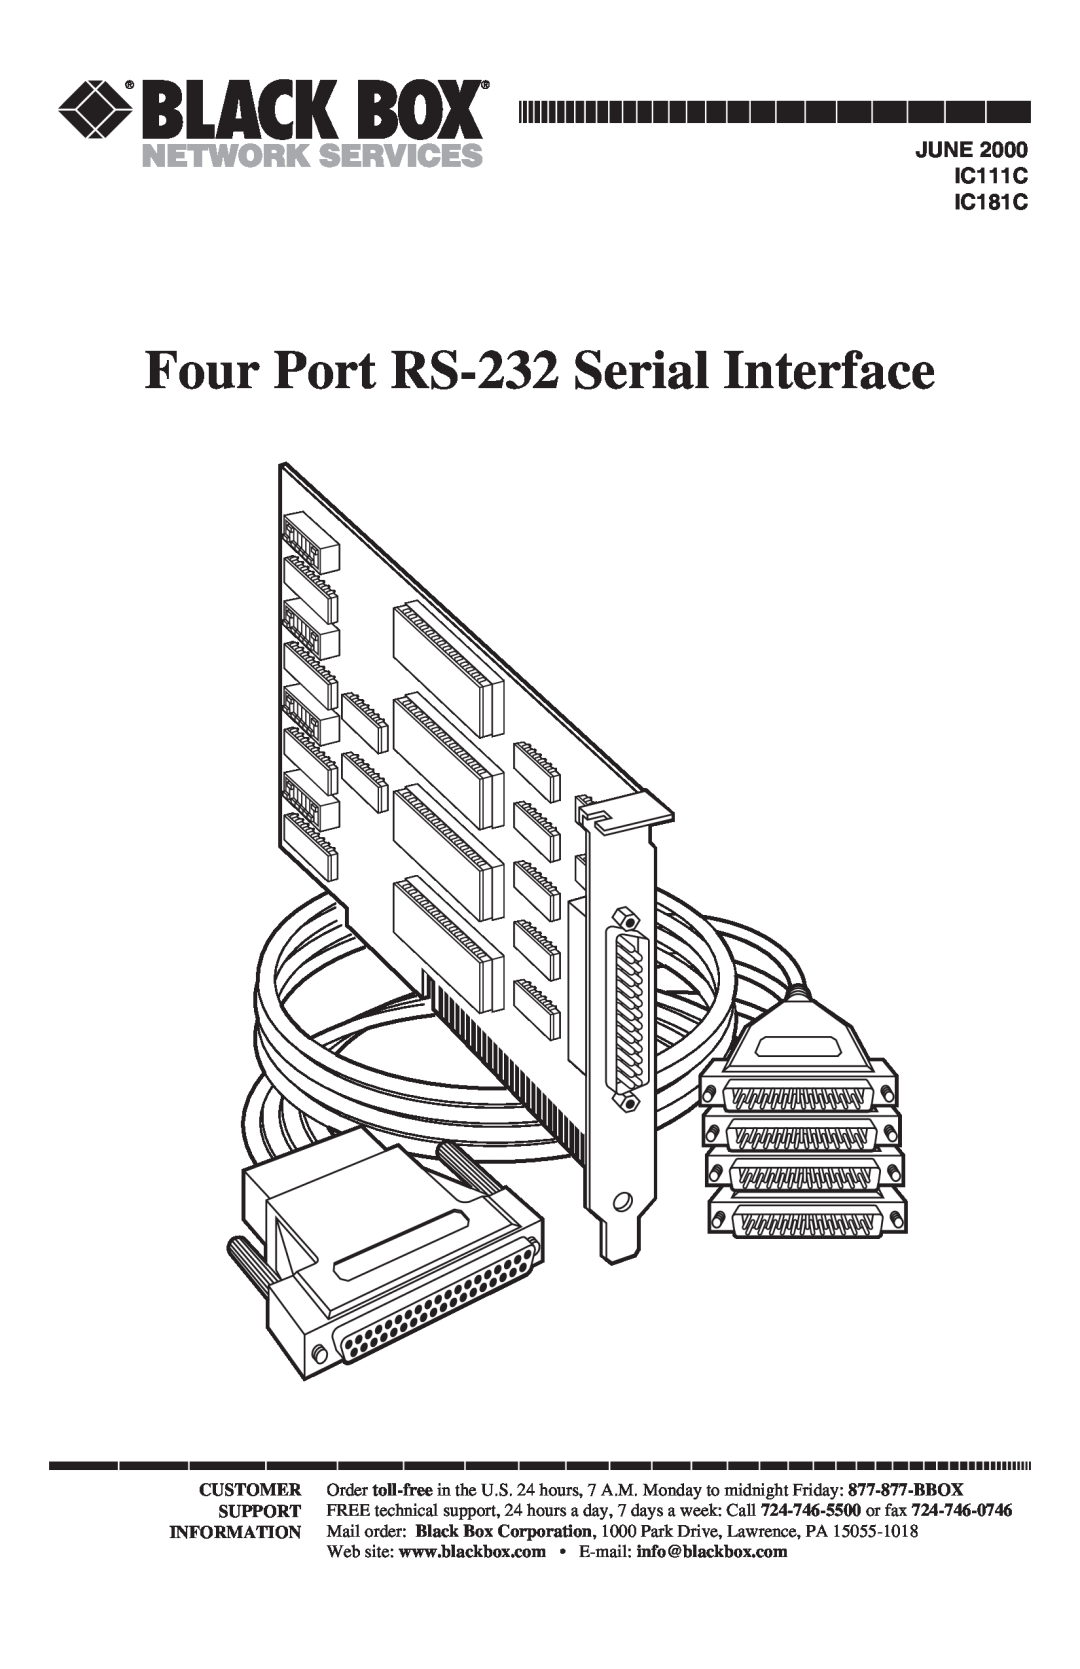 Black Box RS-422, RS-485 user manual Port 10/100 Device Server, RS-232/422/485, DB9 M, Customer Support Information 